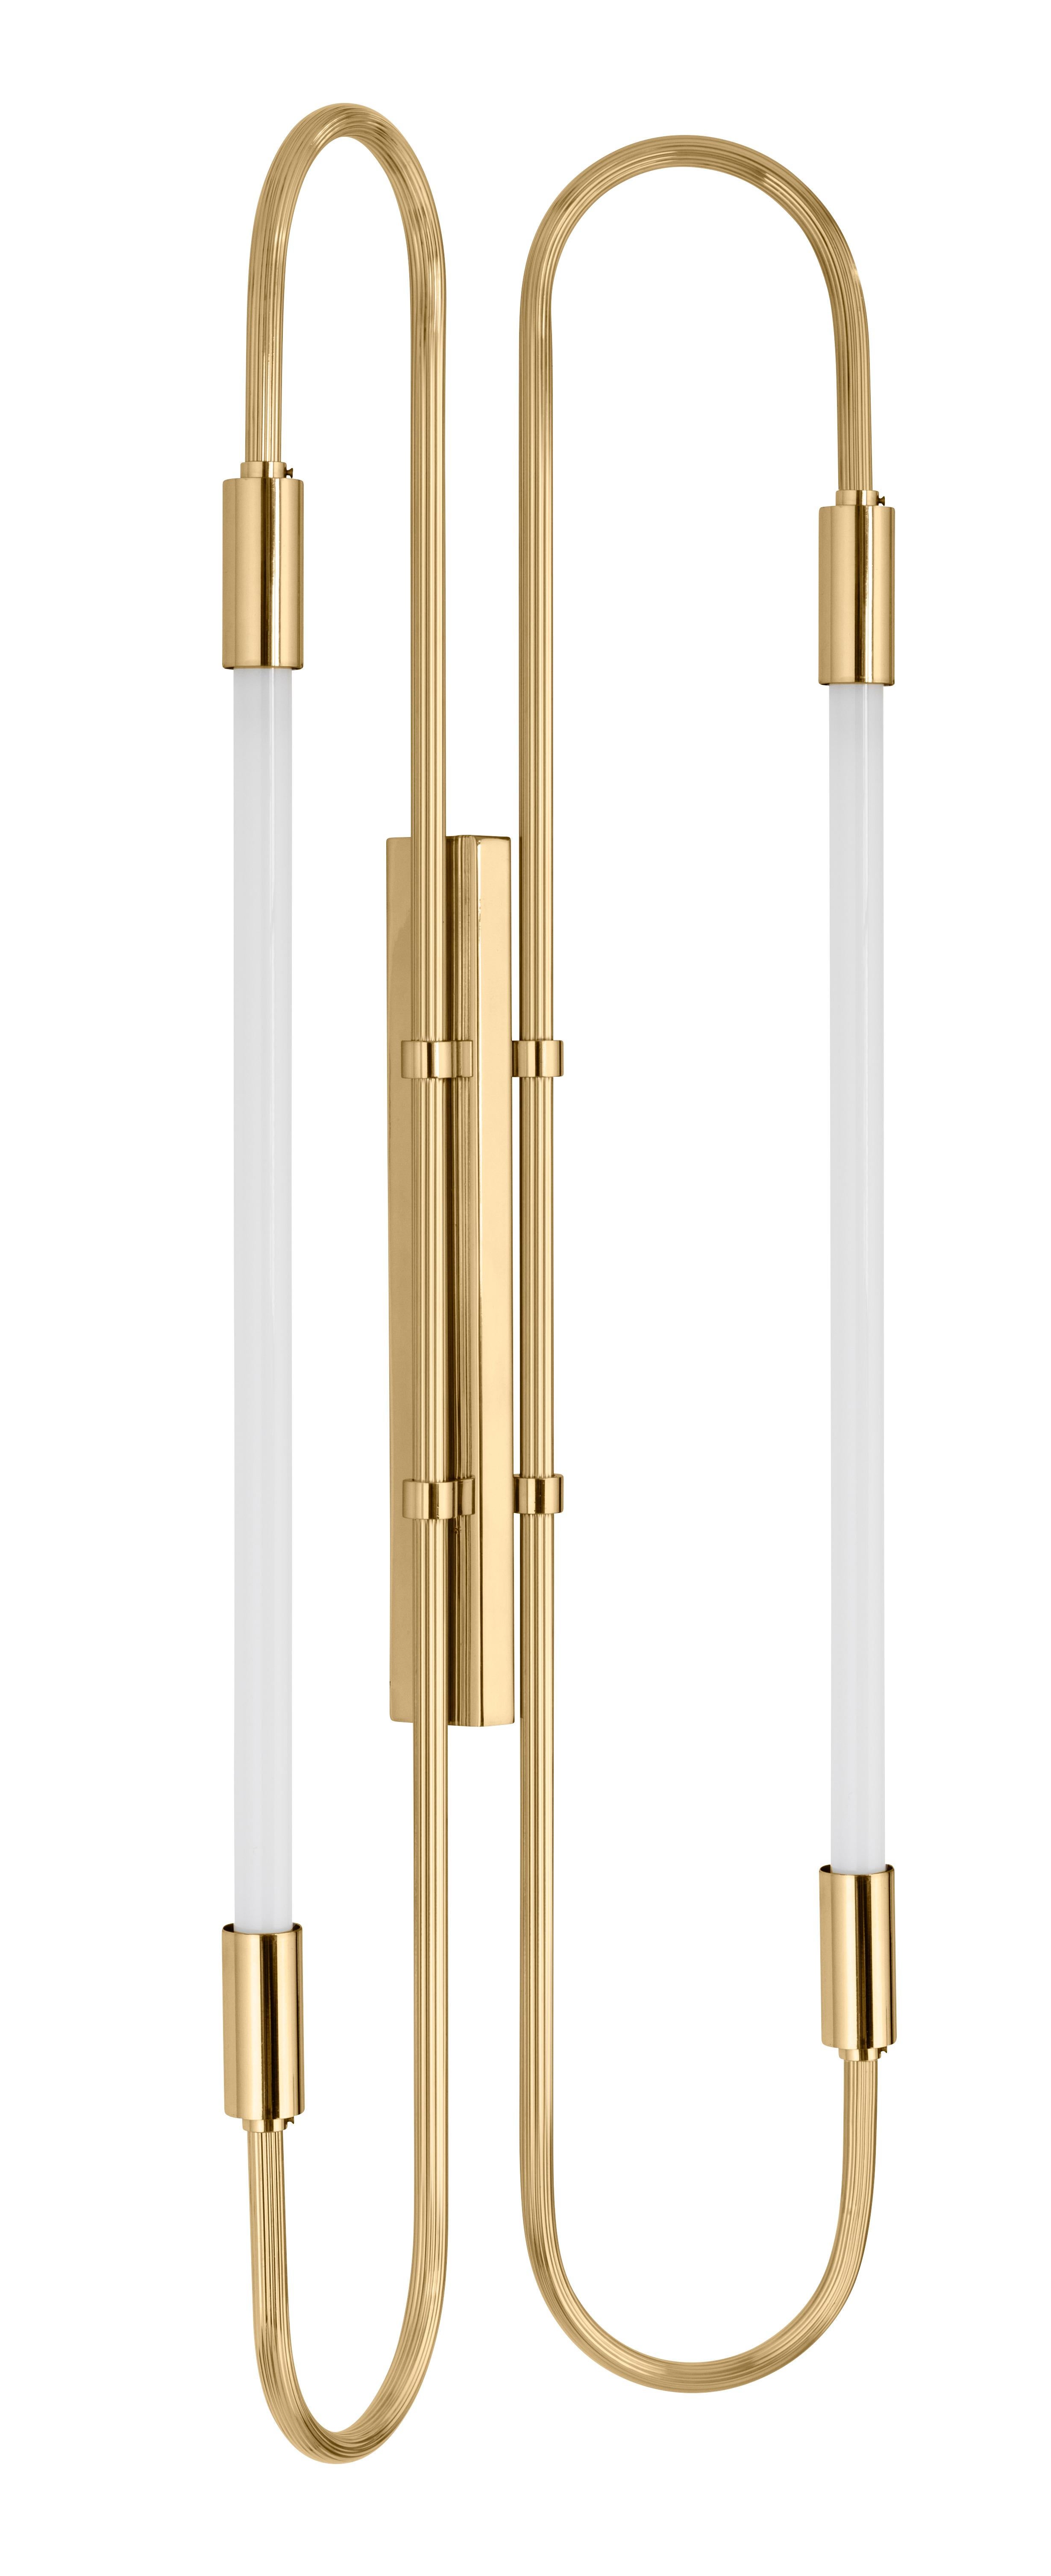 Wall lamp Neon Double 103 by Magic Circus Editions
Dimensions: H. 103 cm, W. 37 cm, D. 11 cm, 3.6 kg.
Materials: Fluted brass tube and glass.
Available Finishes: brass (lacquered polished brass, unlacquered polished brass, brushed brass) or